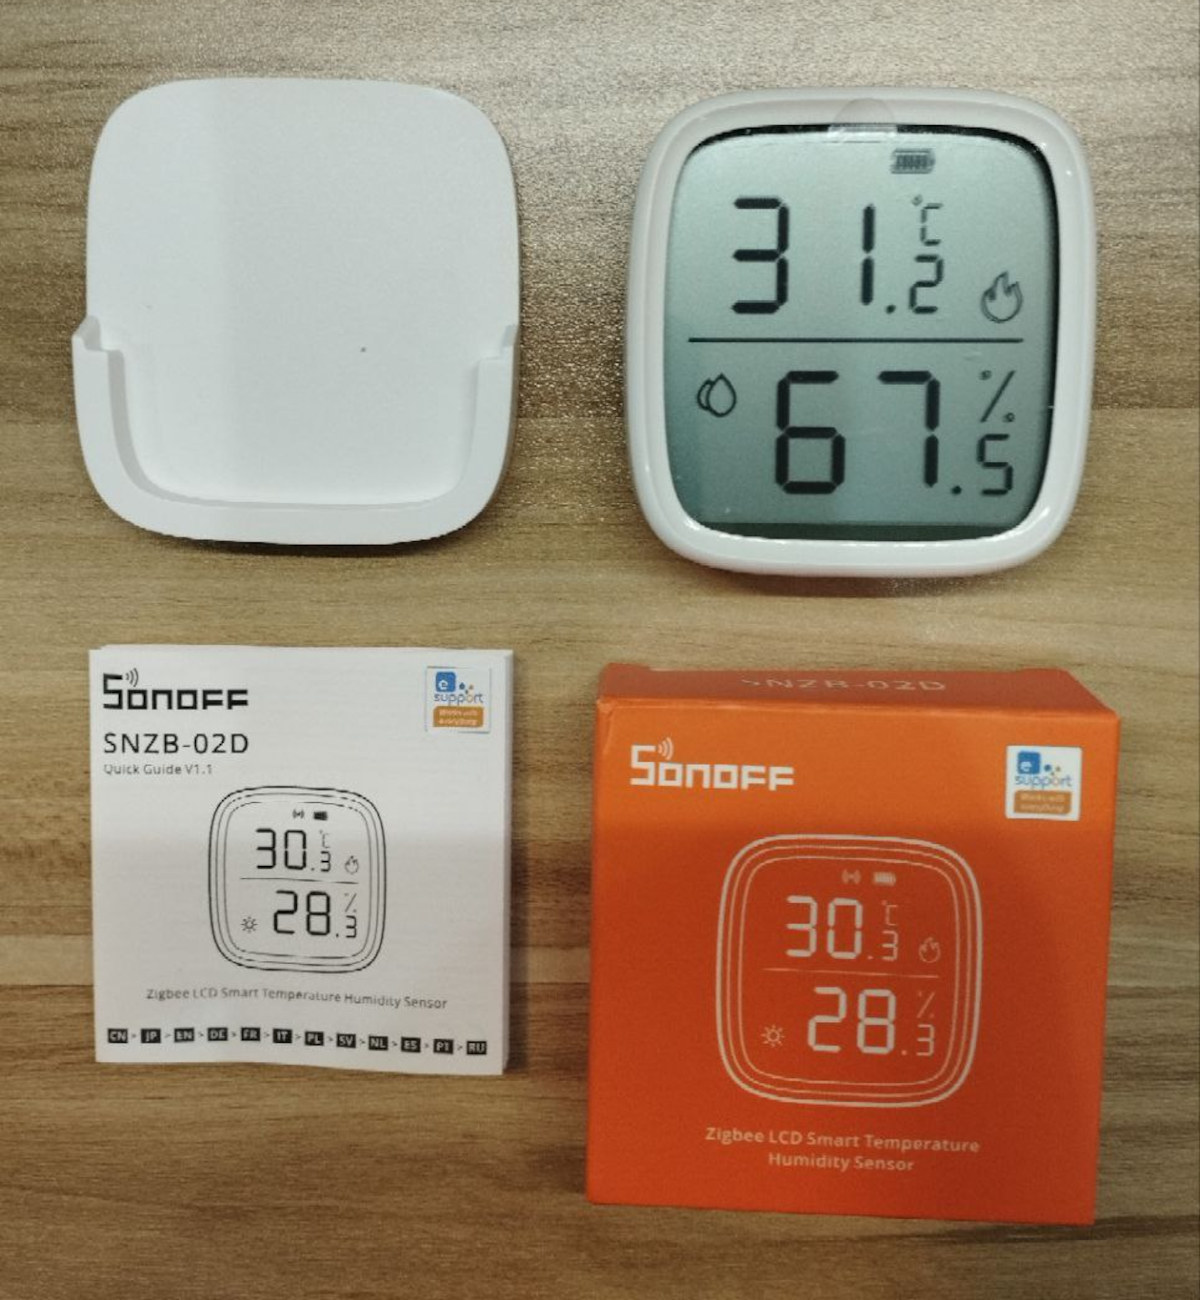 SONOFF SNZB-02P Zigbee Temperature & Humidity Sensor Review - SONOFF  Official